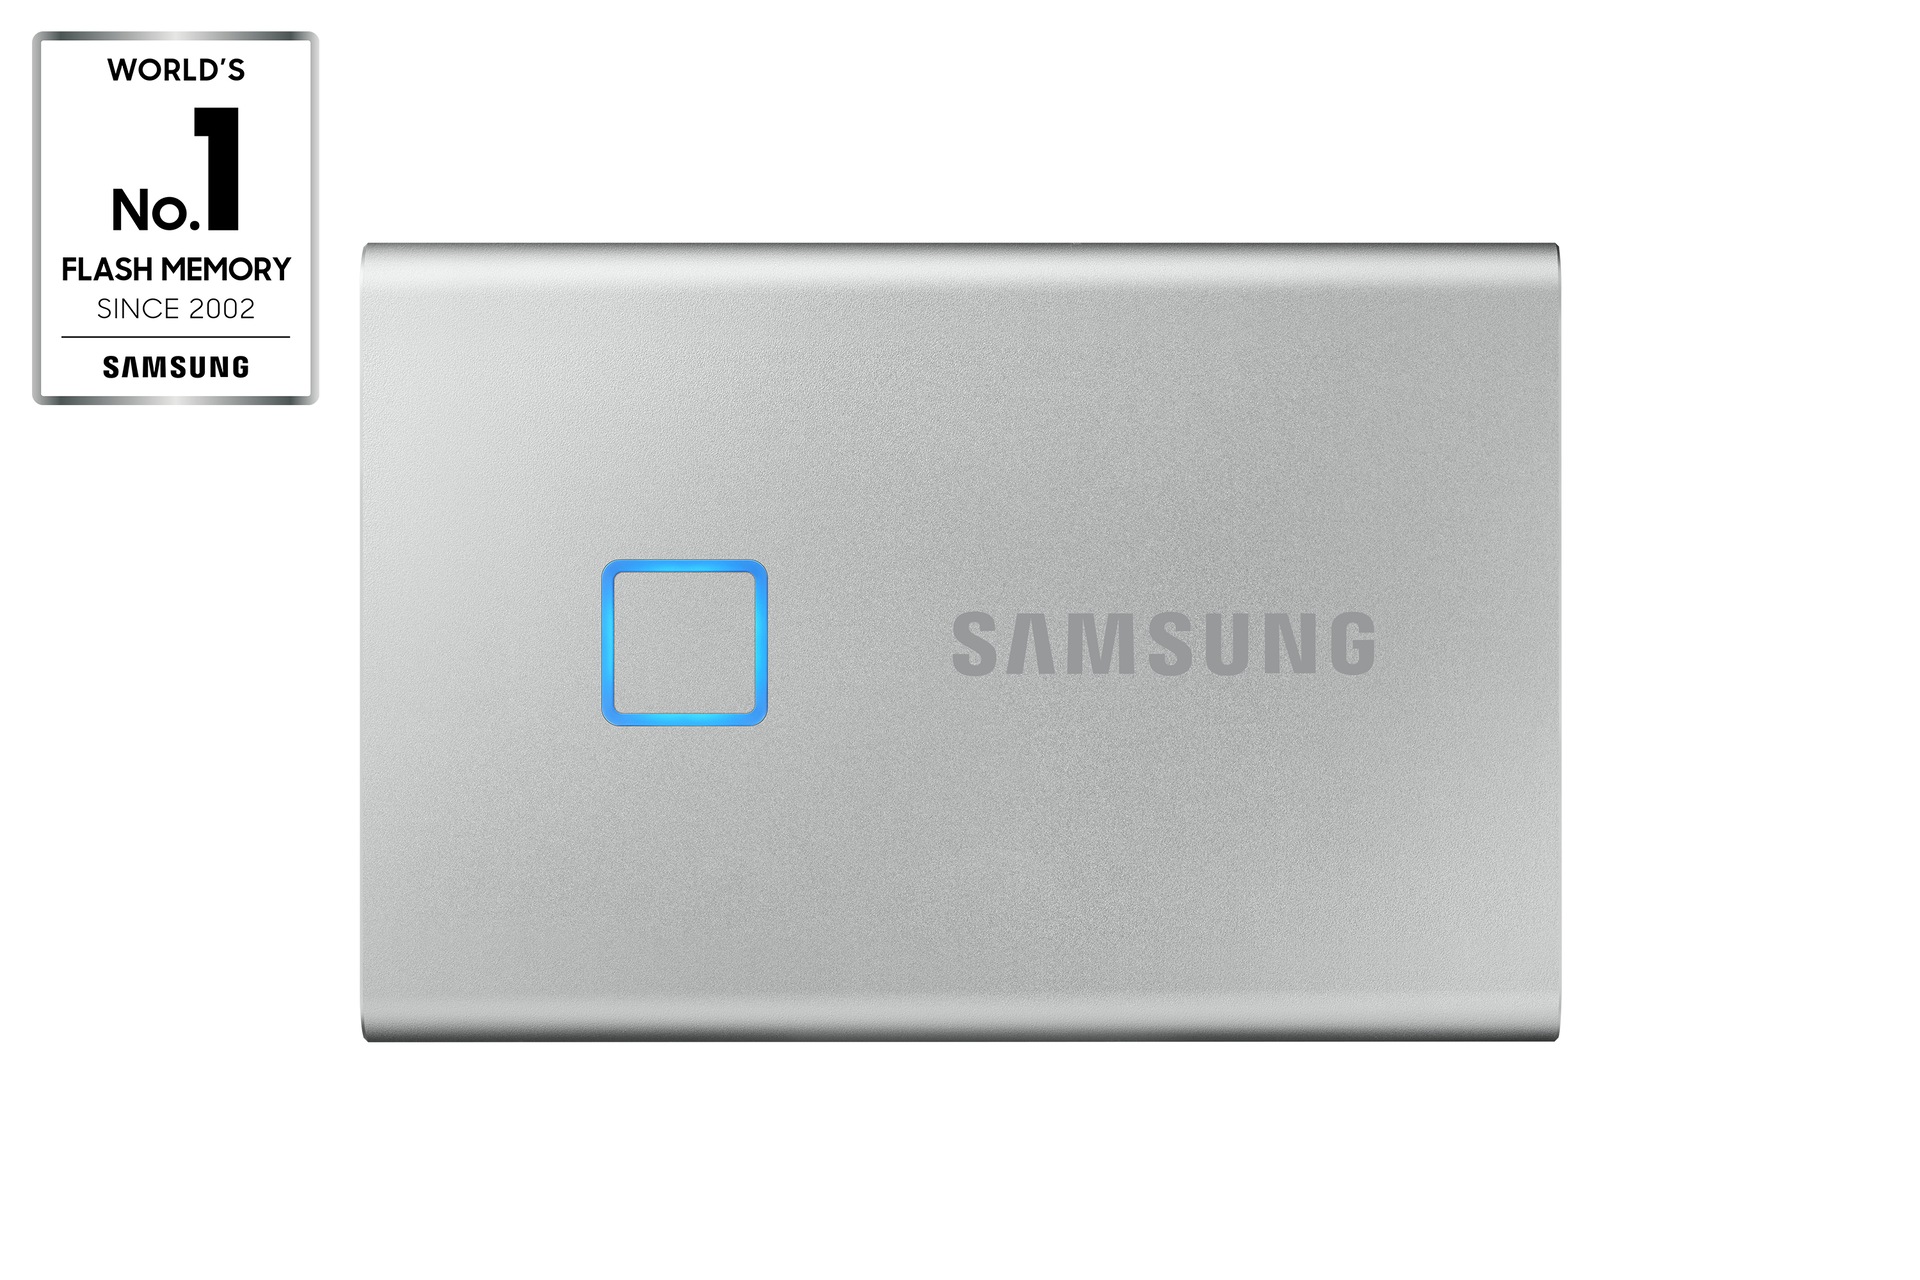 Samsung Portable SSD T7 Touch 2 TB